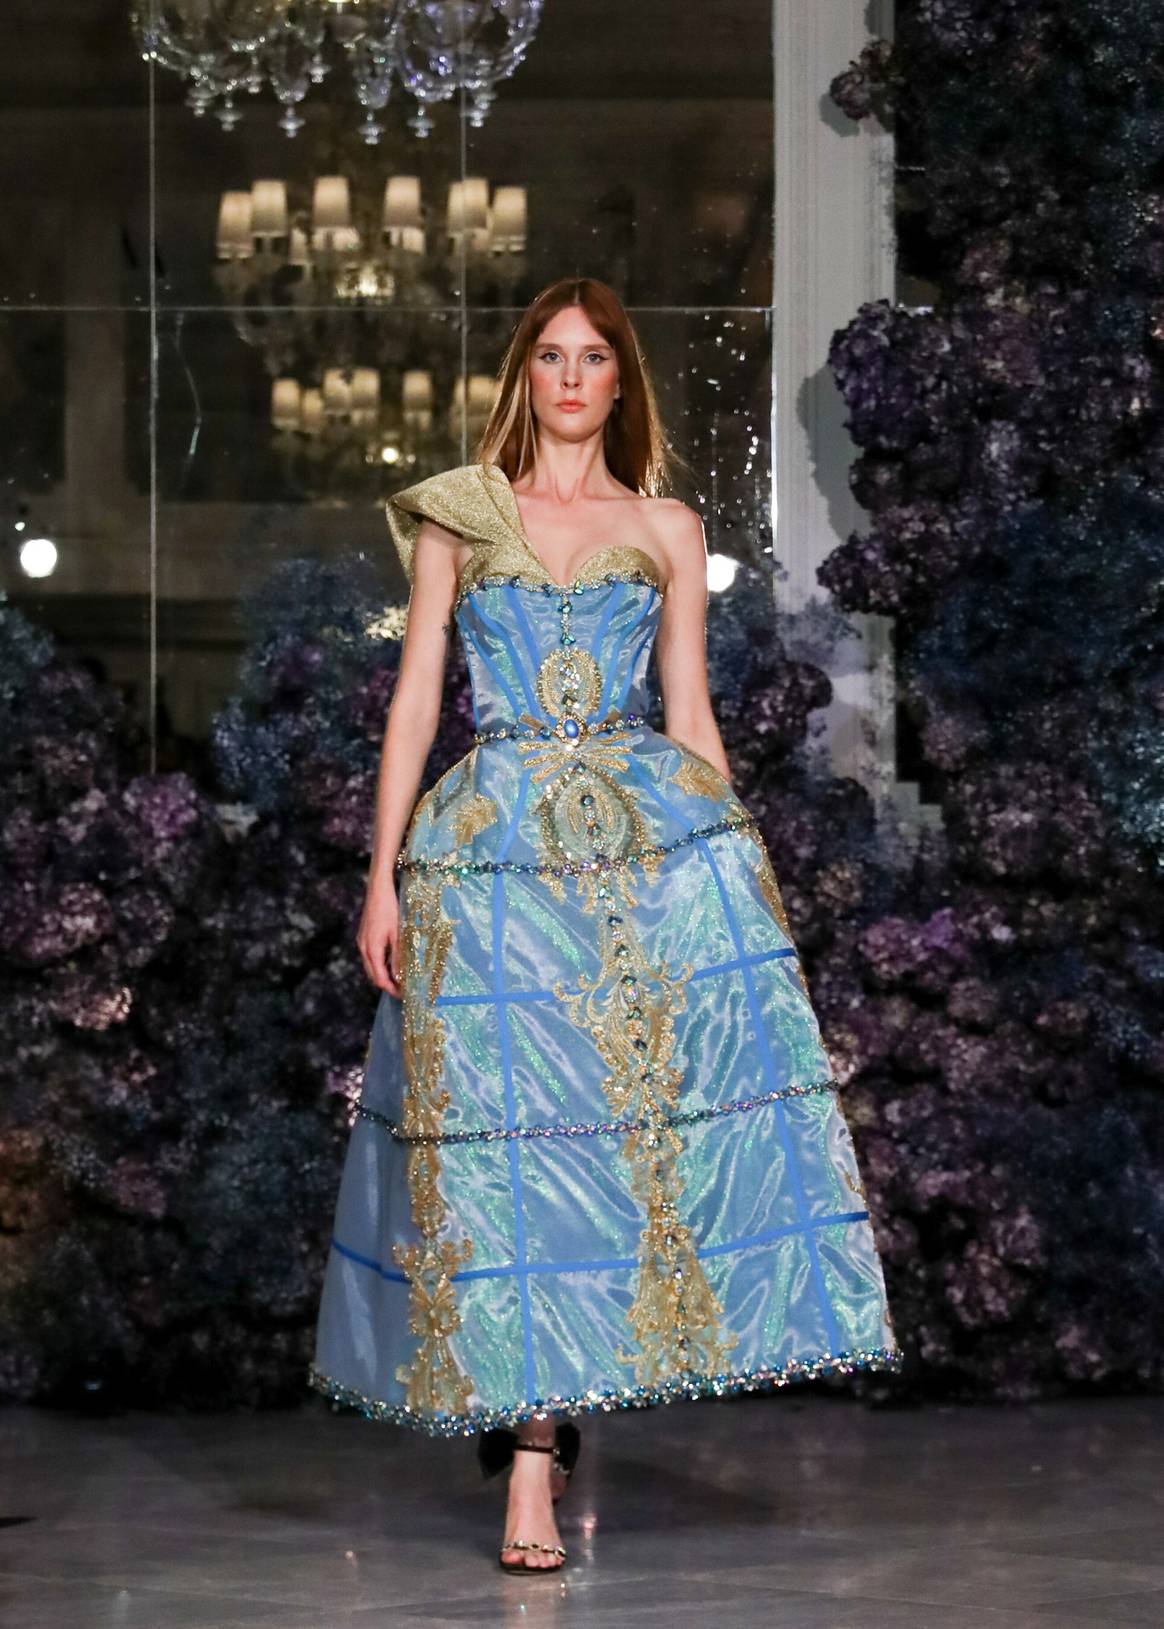 Christian Siriano cocktail couture collection with Bombay Sapphire